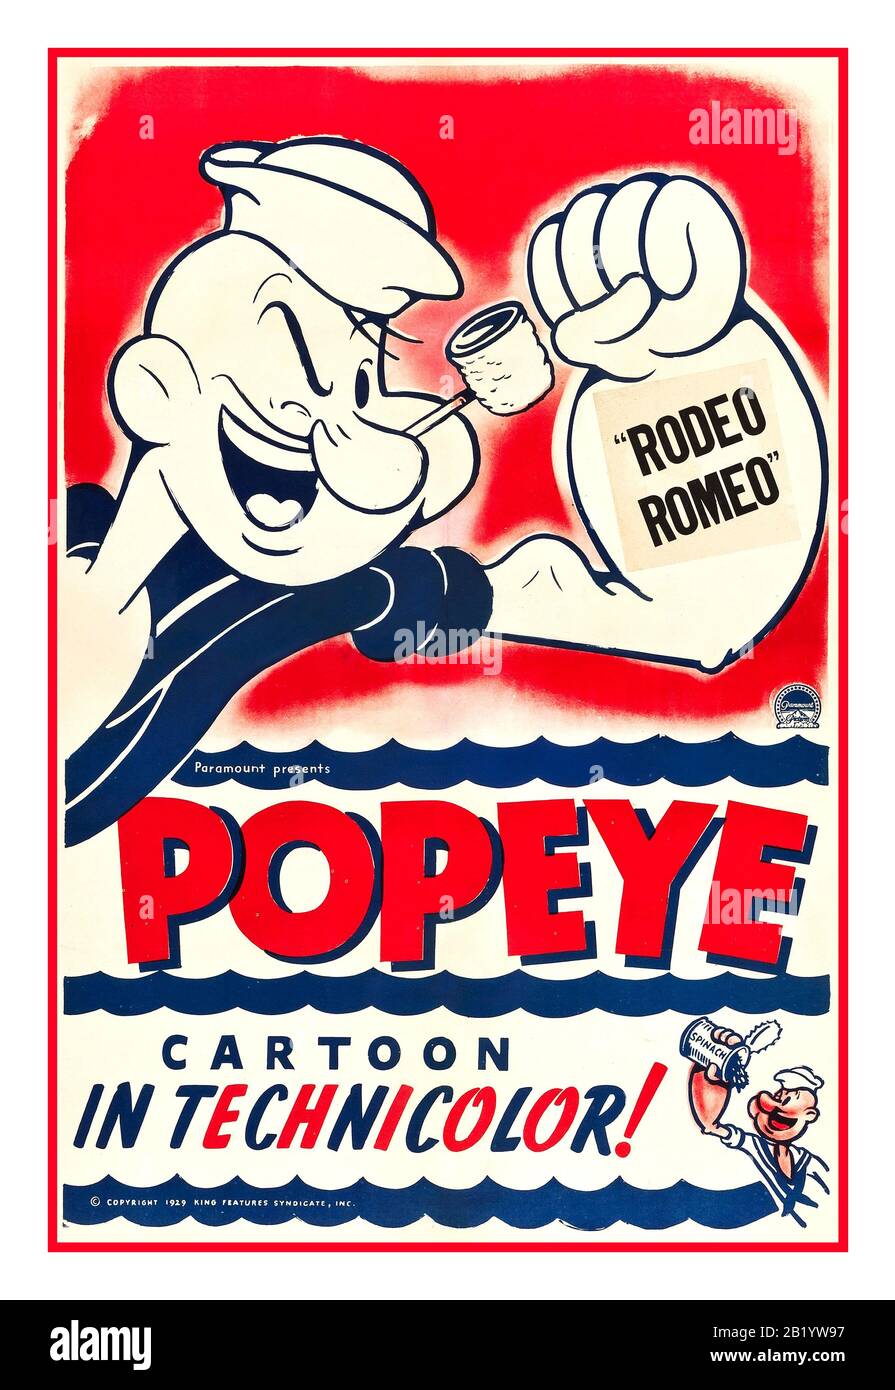 POPEYE Vintage 1940’s Cartoon Film Poster Rodeo Romeo is Popeye's 142nd theatrical cartoon, released by Famous Studios on August 16, 1946.  It features Popeye the Sailor as the main protagonist, Olive Oyl as the romantic interest, Badlands Bluto as the main antagonist and a rodeo bull as a secondary antagonist. In addition to featuring the characters in a Western setting (as in Popalong Popeye and Tar with a Star), this cartoon is notable for the use of hallucinatory drugs in its plot. Cartoon in Technicolor Stock Photo